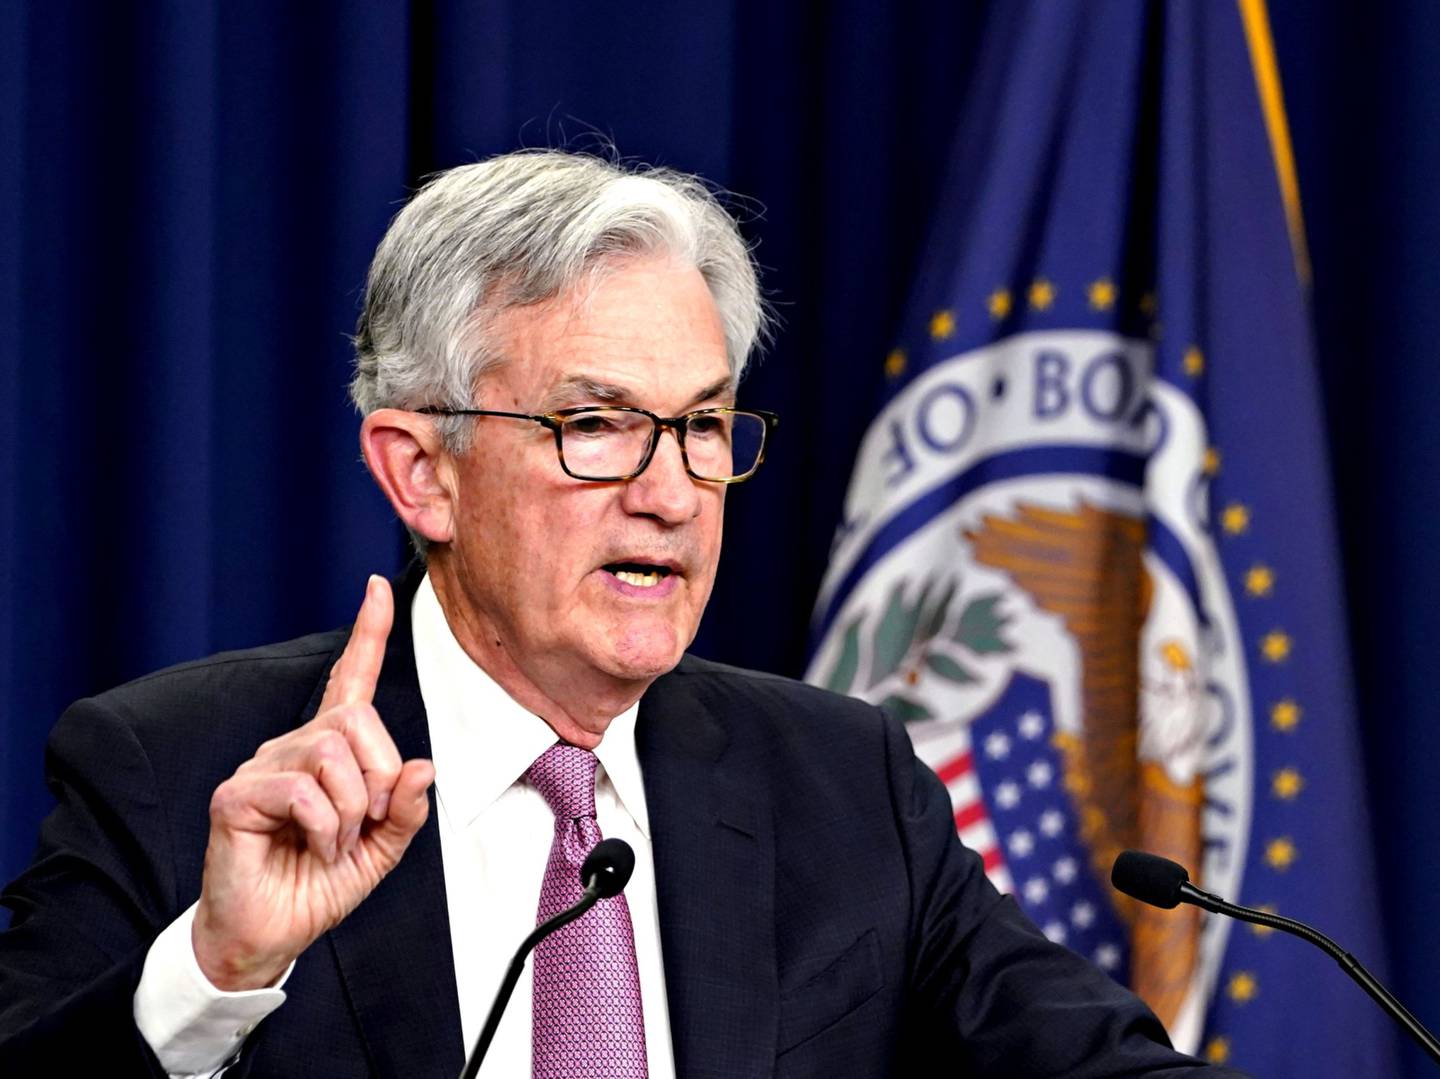 Jerome Powell is against the prohibition of cryptocurrencies, but is reserved in his judgment of such assets.dfd